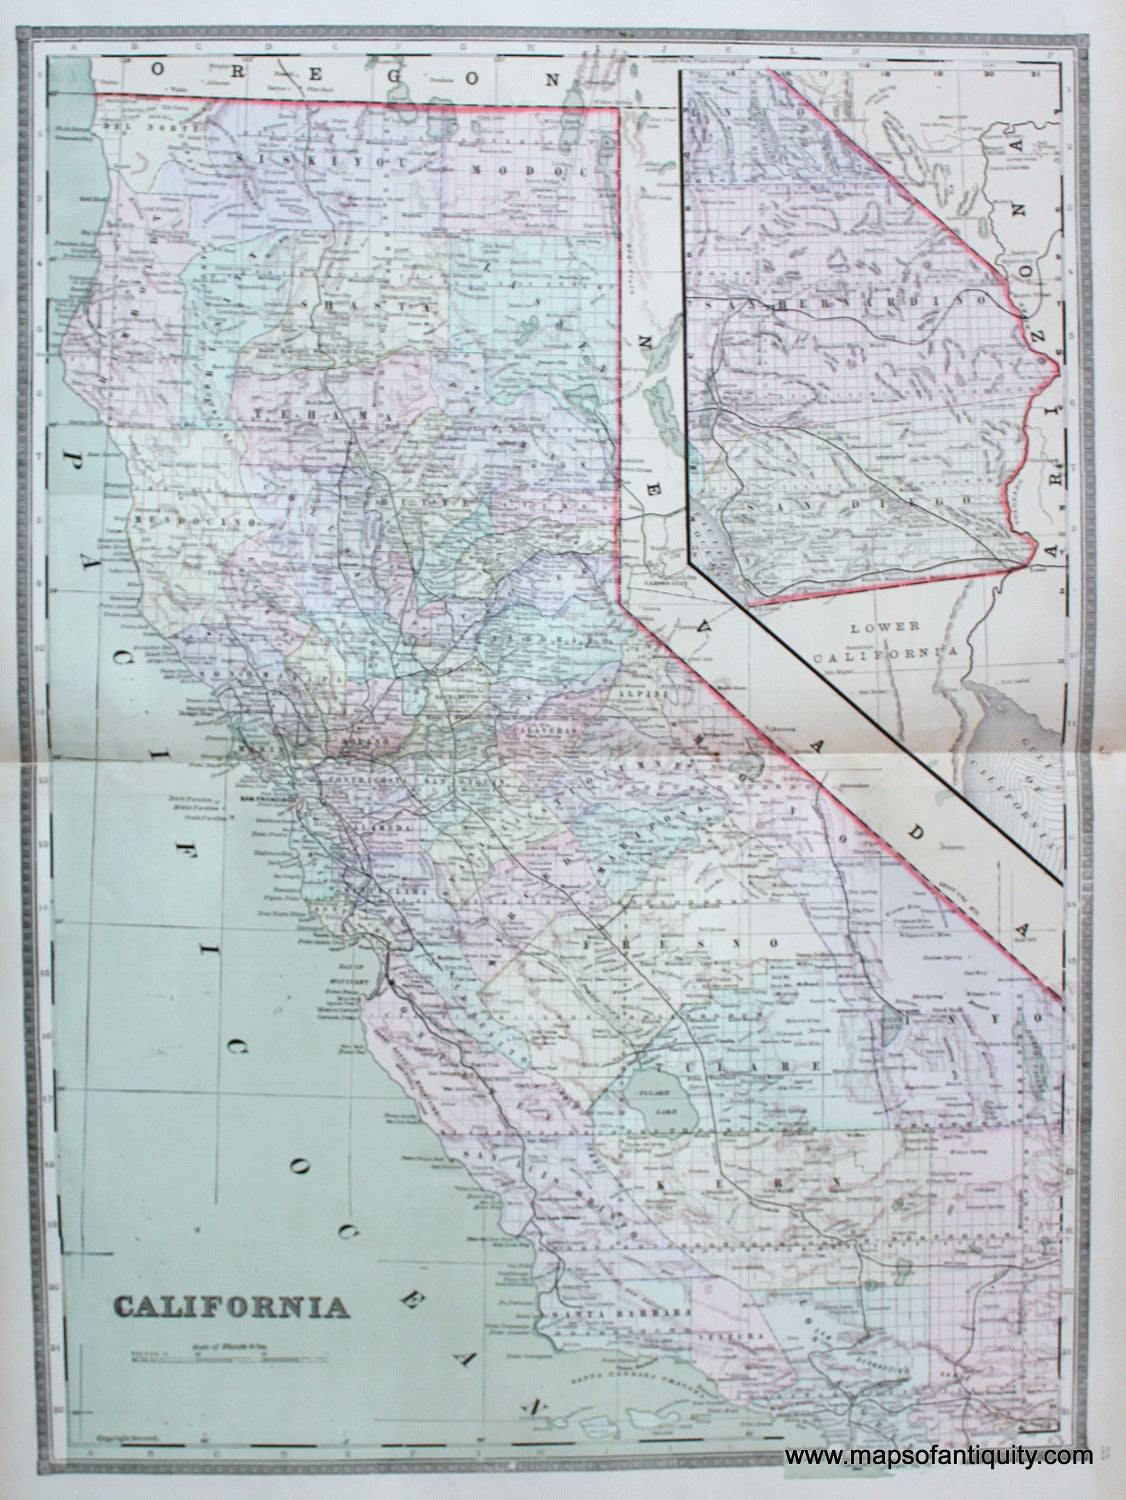 Antique-Hand-Colored-Map-California-United-States-West-1887-Bradley-Maps-Of-Antiquity